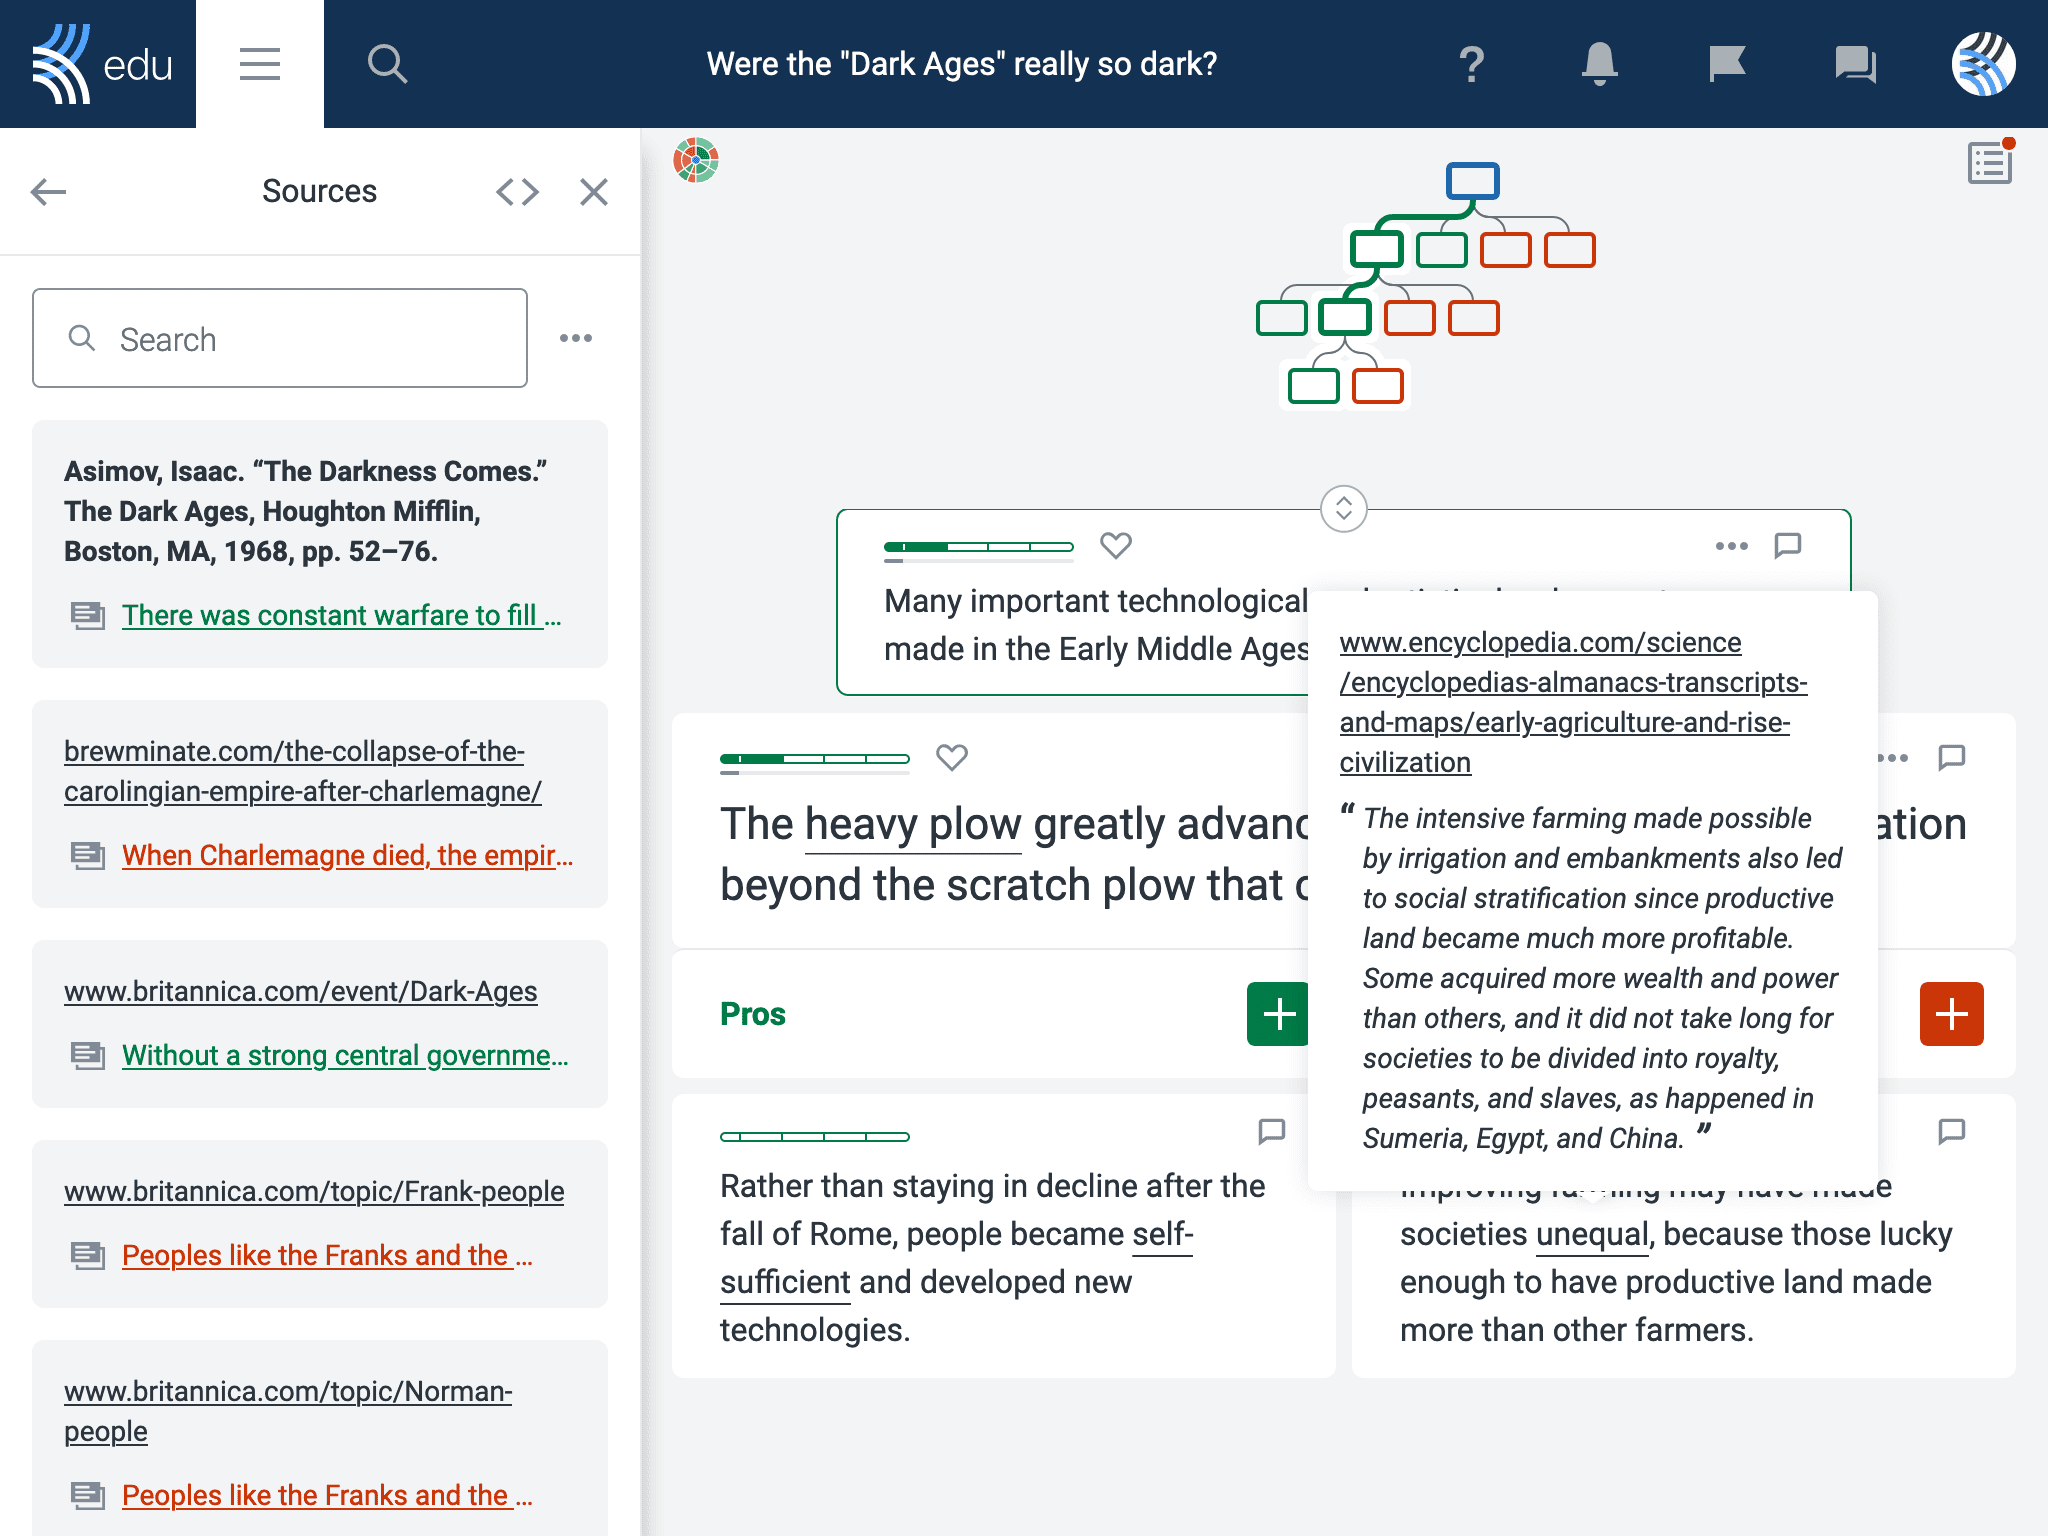 A collated list of sources used in the discussions appears in the Sources Sidebar on the left hand side of the discussion.